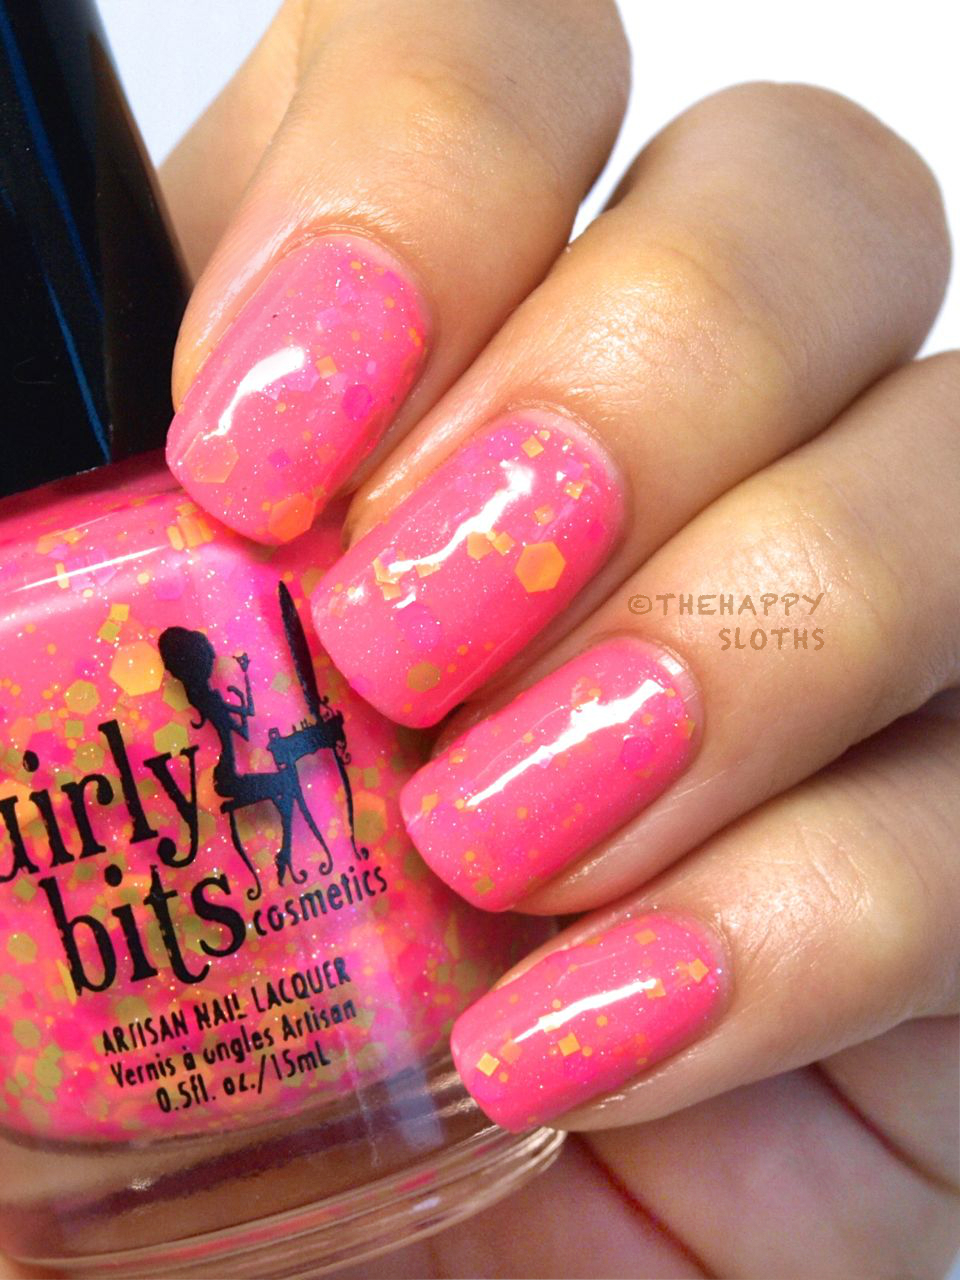 Girly Bits Nail Polish in "Food Fight!" & "Neutron Dance": Review and Swatches